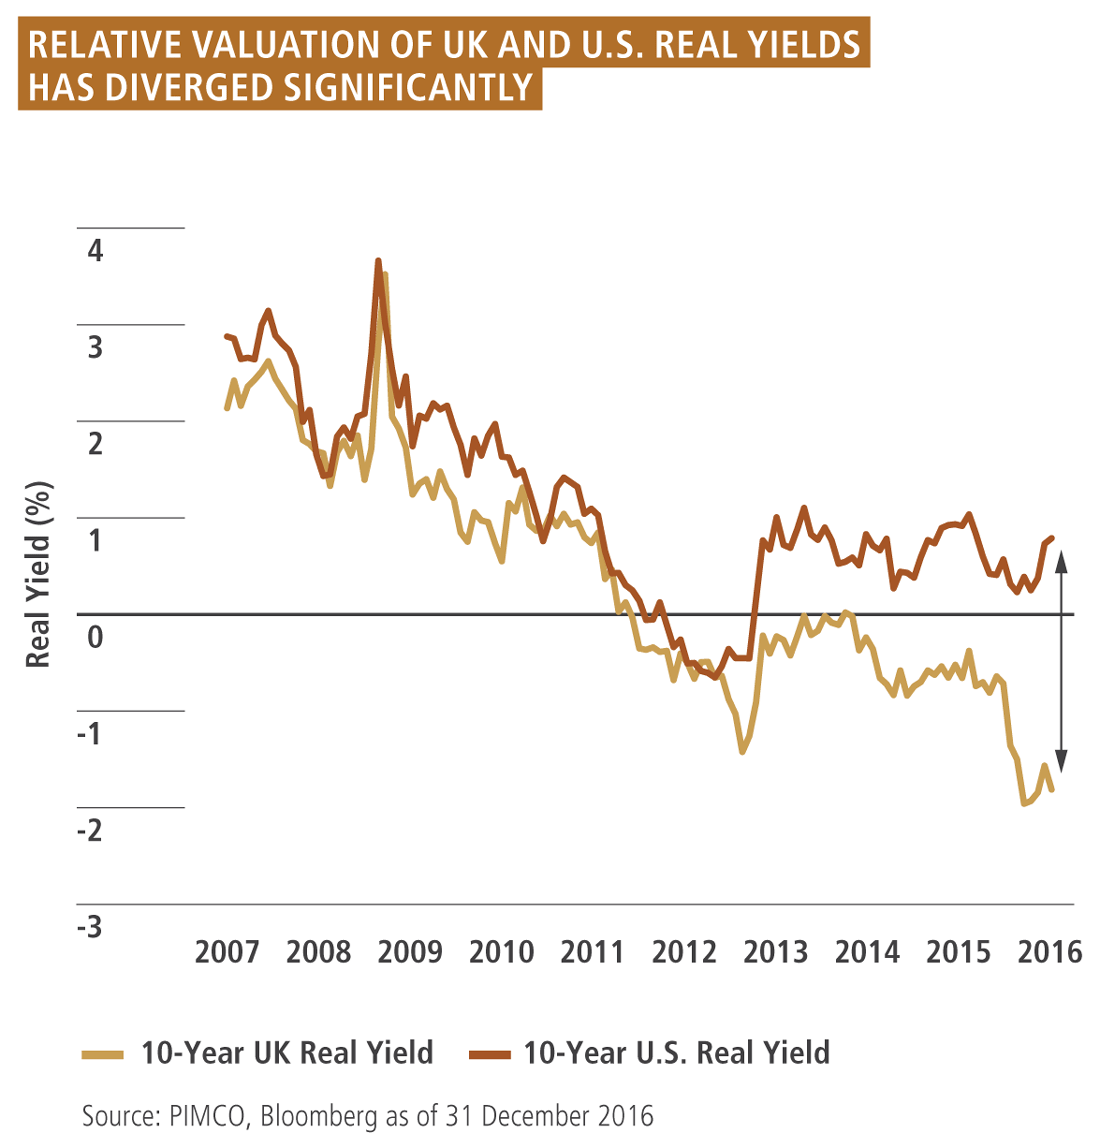 The figure is a line graph showing the 10-year sovereign real yields for the United Kingdom and the United States, from 2007 through year-end 2016. In December 2016, 10-year U.S. real yield was at about 0.75%, while that of the U.K. was about negative 1.75%, marking the biggest divergence on the chart. The real yields, which fluctuate in a downward slanting channel over time, roughly track each other through 2012, then start to diverge. Both are negative in 2012, but then 10-year U.S. real yield shoots upward from about negative 0.5% into positive territory, reaching as high as 1% in 2013, while that of the U.K. dropped to about negative 1.25% in 2012, before moving up to about negative 0.25% by 2013. Both metrics peaked around 3.5% in late 2008.